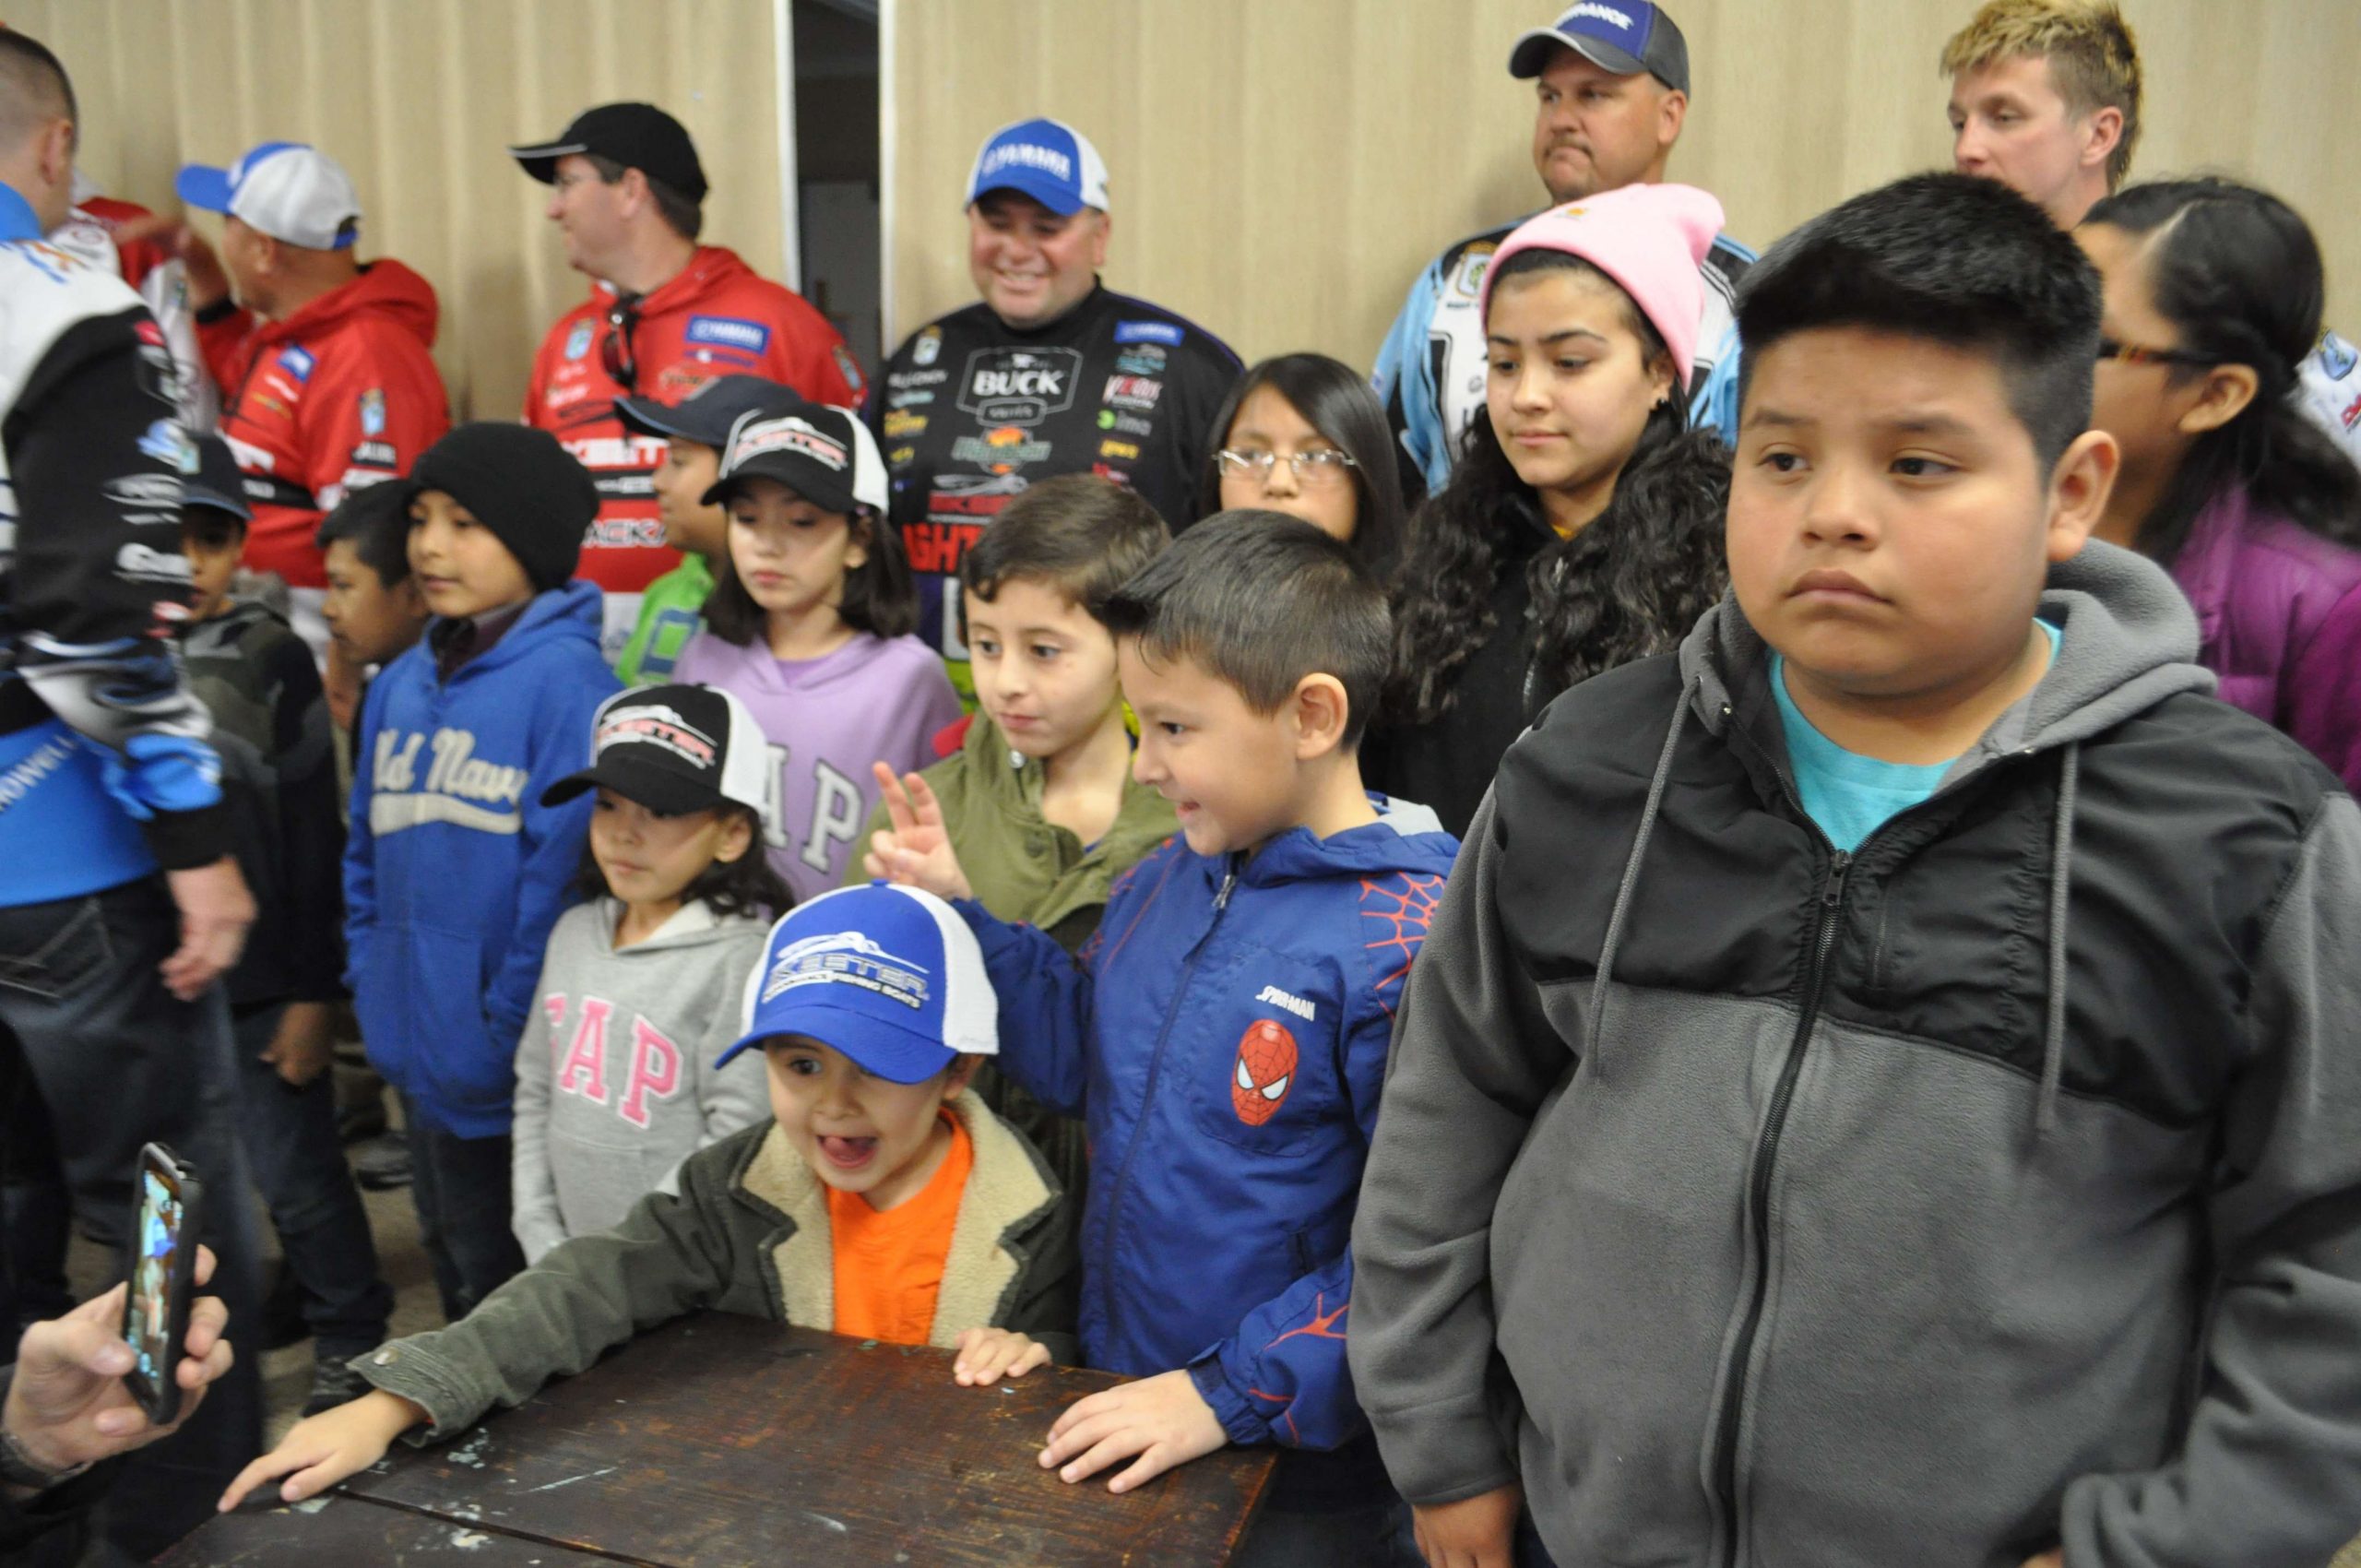 The children get ready to pose for a group picture with the anglers.